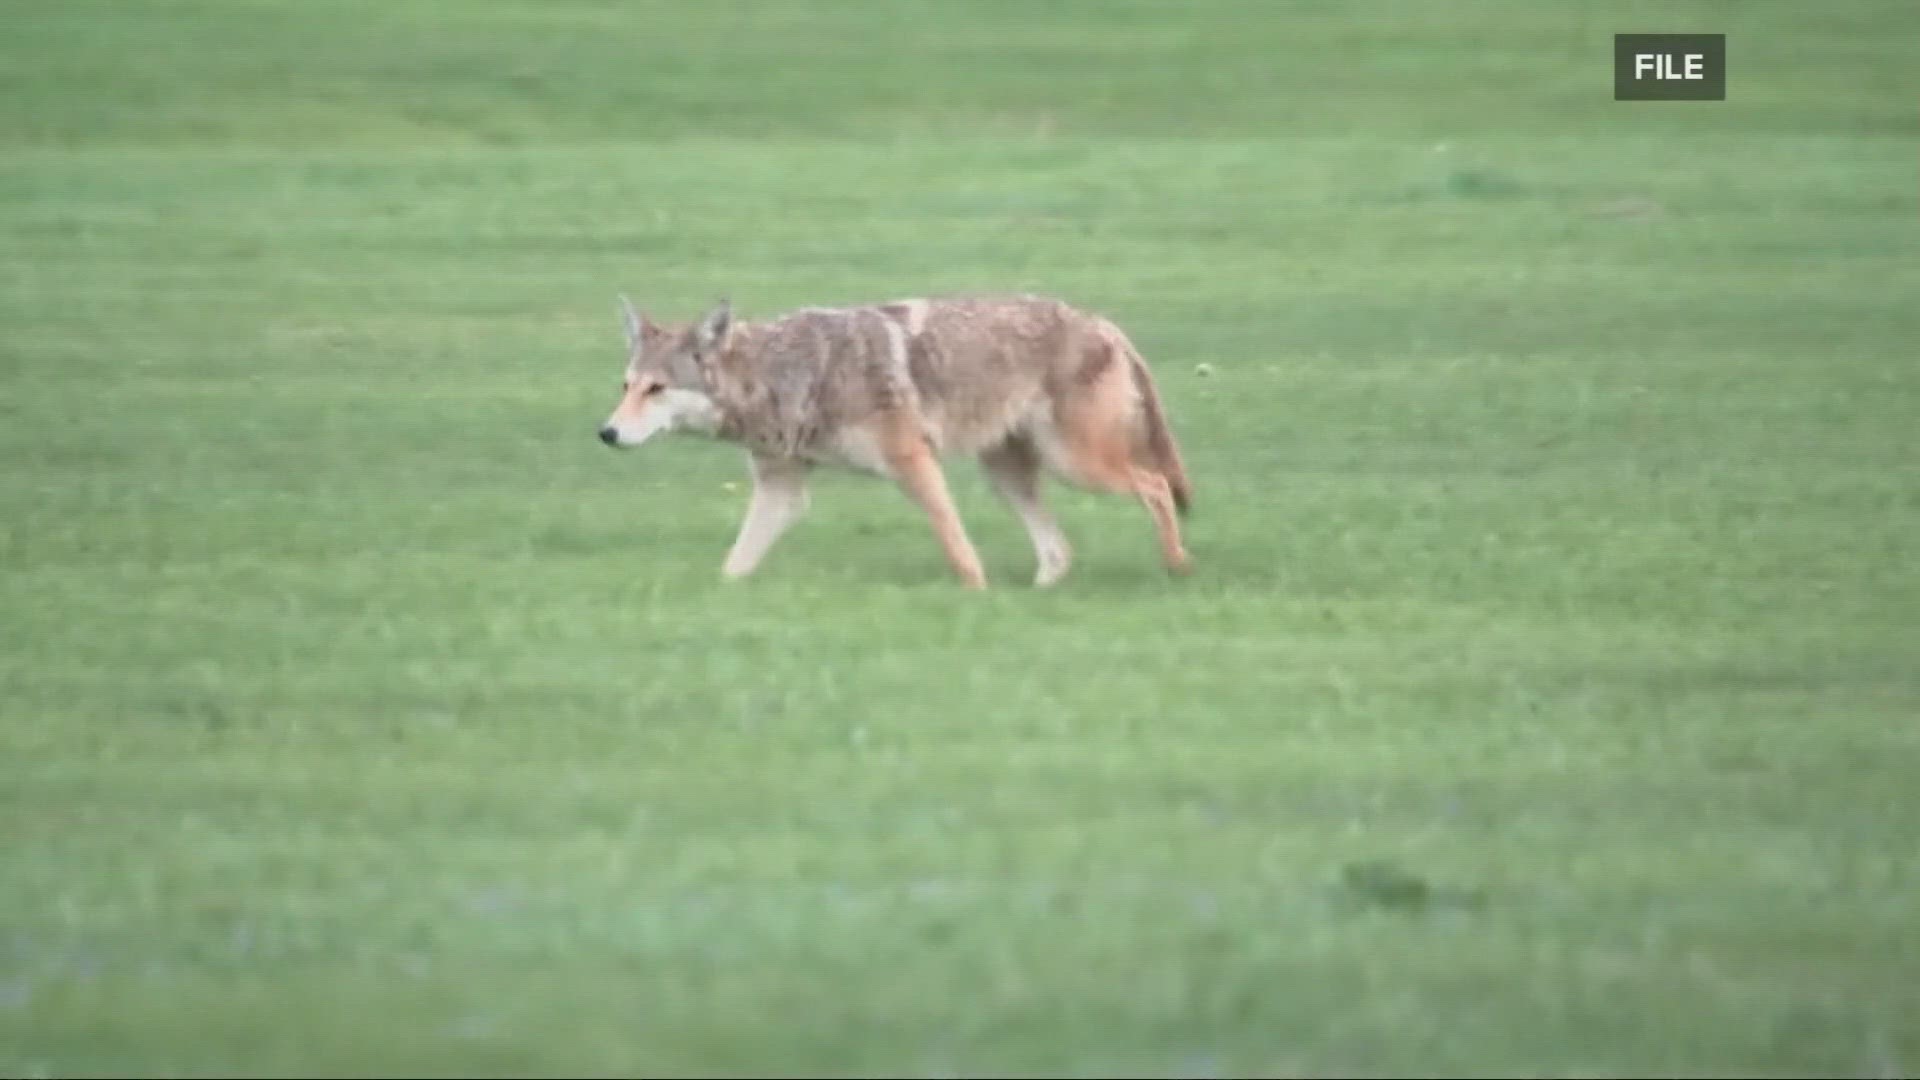 Franklin County State Wildlife Officer Brad Kiger said he has only heard of two coyote attacks in the last 23 years.